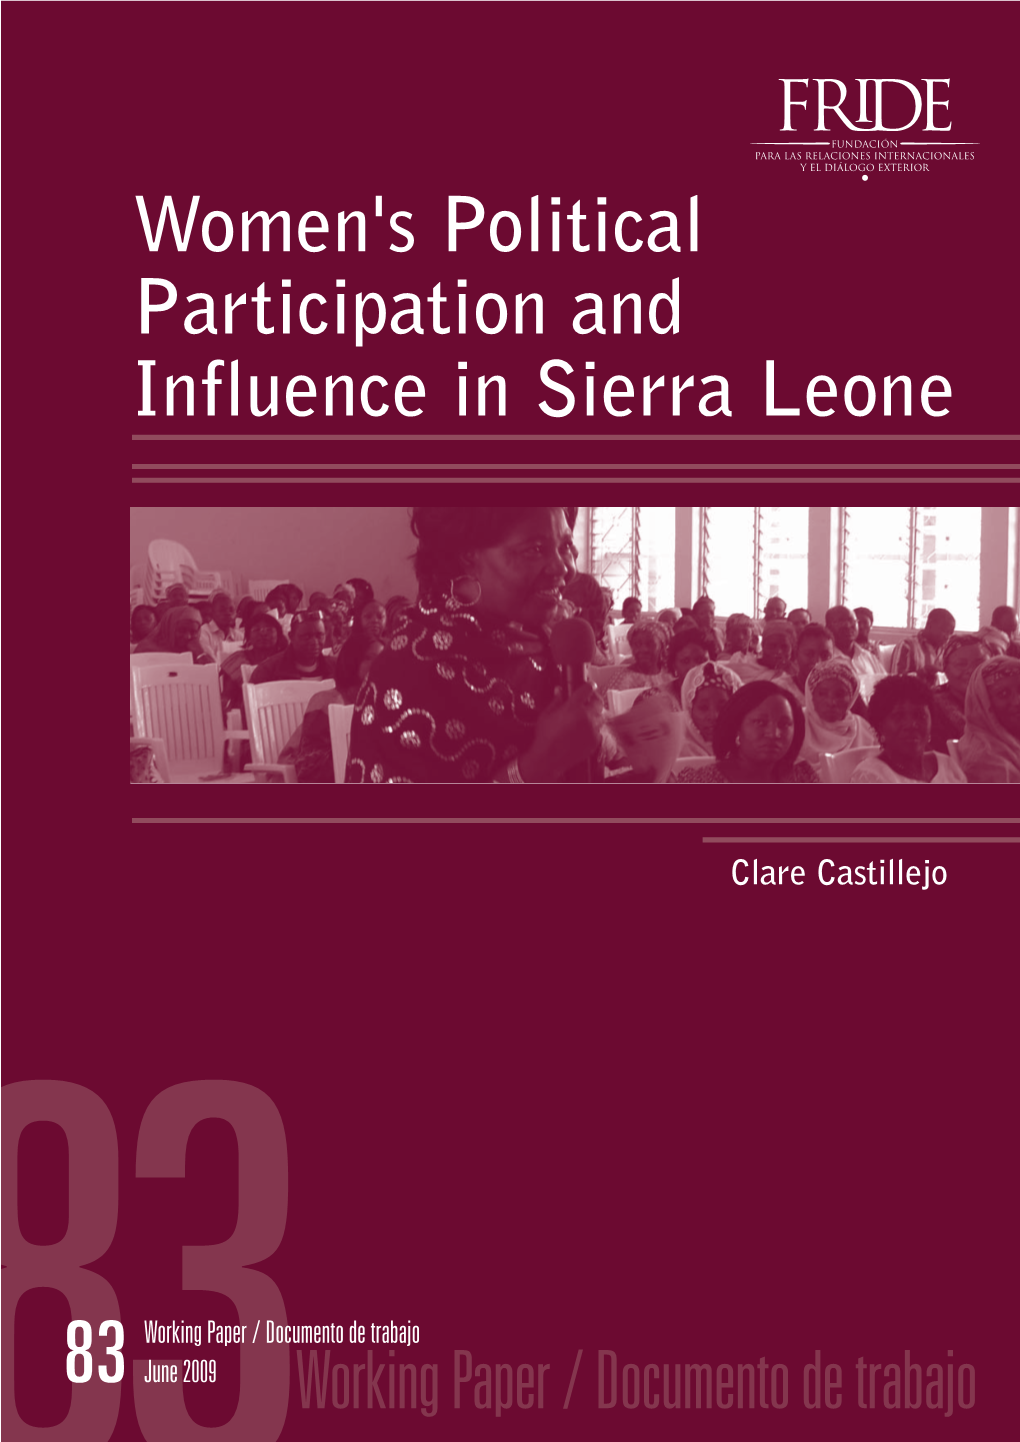 Women's Political Participation and Influence in Sierra Leone